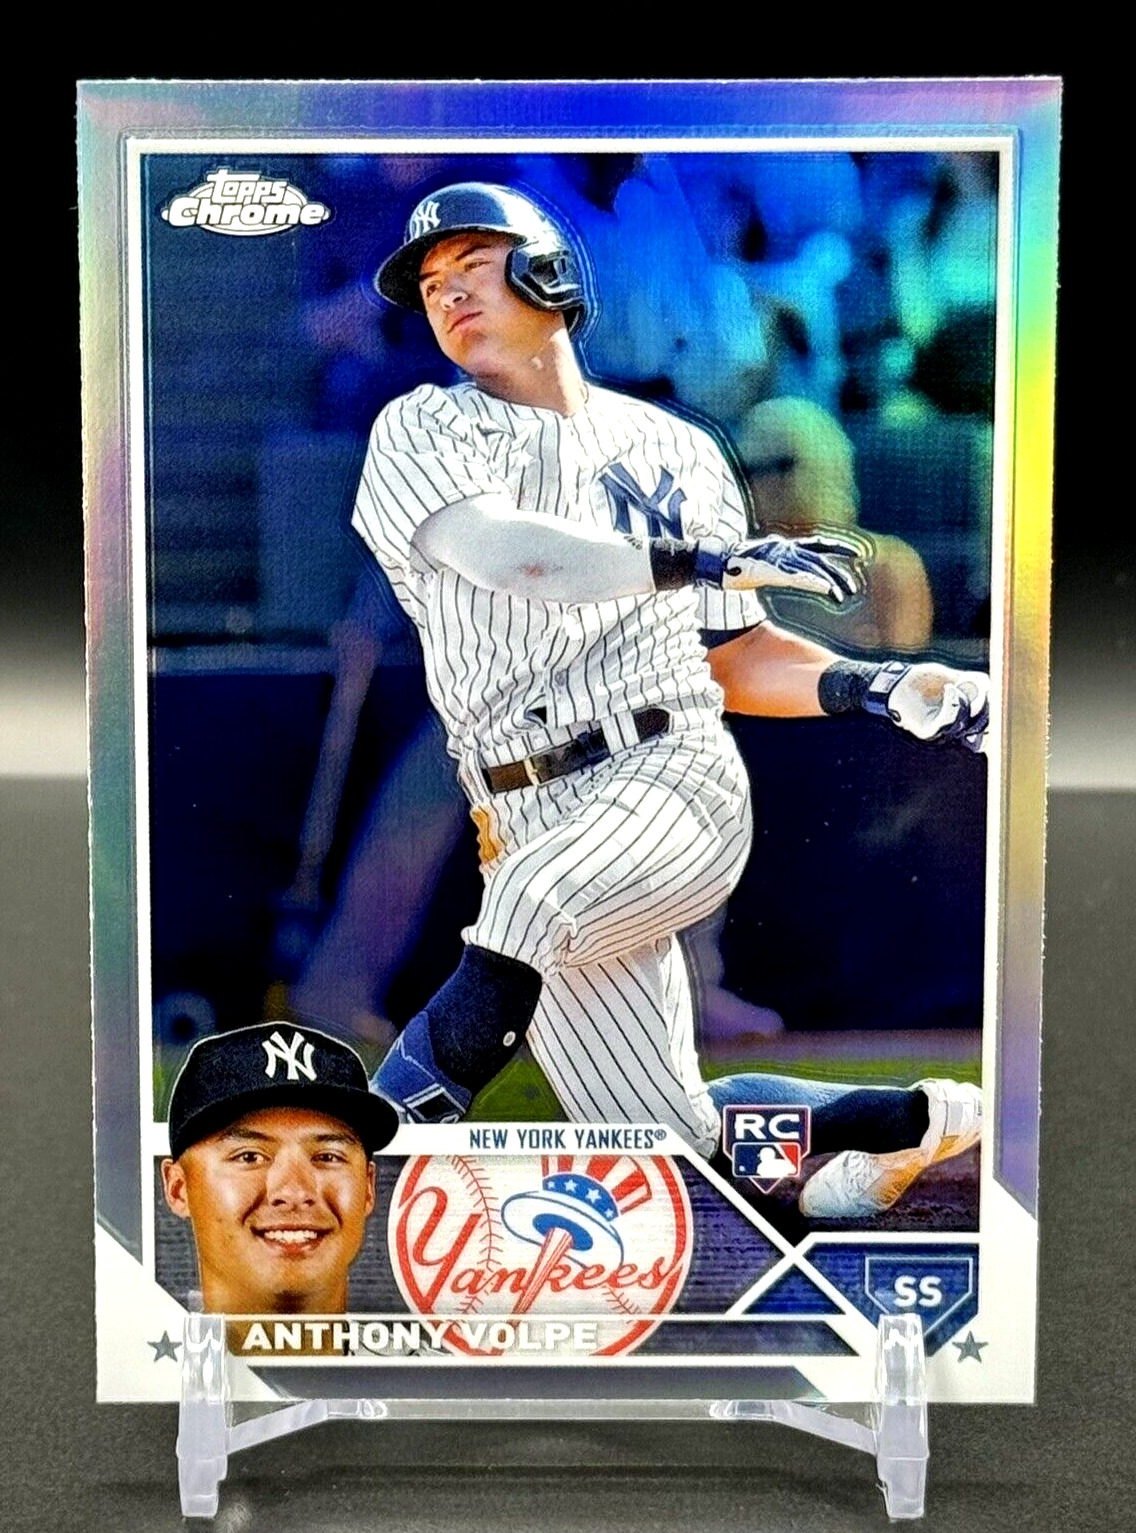 2023 Topps Chrome Anthony Volpe Refractor Rookie Card RC #4 New York Yankees